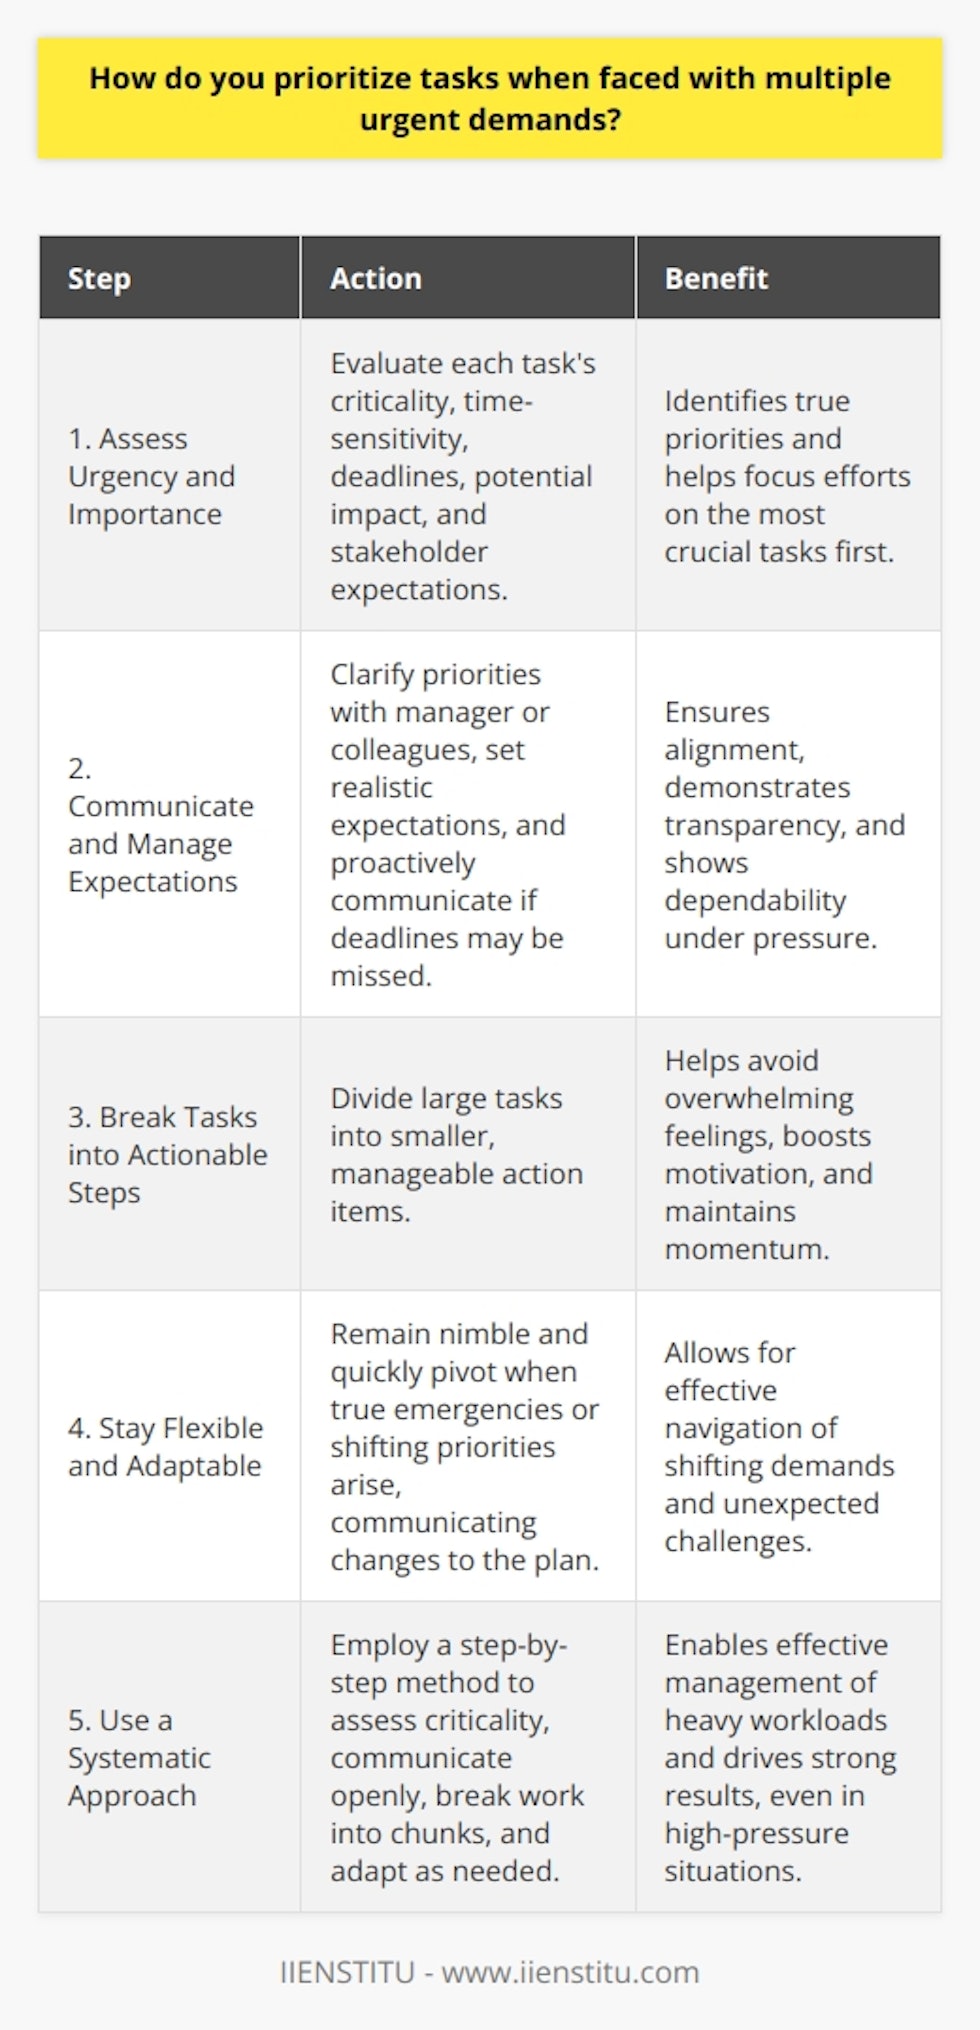 When facing multiple urgent demands at work, I follow a step-by-step approach to prioritize tasks effectively. This process helps me stay organized, focused, and deliver quality results under pressure. Assess the Urgency and Importance of Each Task First, I quickly evaluate how critical and time-sensitive each request is. I consider factors like deadlines, potential impact, and stakeholder expectations. This initial assessment helps me identify true priorities. Example: Last month, my manager asked me to prepare an urgent client presentation while I was working on month-end reports. I realized the client meeting was the top priority and focused my efforts there first. Communicate and Manage Expectations Next, I touch base with my manager or colleagues to clarify priorities. Open communication ensures alignment and sets realistic expectations. If I anticipate missing a deadline, I proactively communicate and propose solutions. Transparency and problem-solving show that Im dependable even under pressure. Break Tasks into Actionable Steps Facing a mountain of urgent to-dos can feel overwhelming. To avoid stress, I break large tasks into bite-sized action items. Checking off smaller milestones boosts my motivation and momentum. Stay Flexible and Adaptable Priorities can shift unexpectedly, so I stay nimble. If a true emergency arises, I quickly pivot and communicate changes to my plan. A calm, flexible approach helps me navigate shifting demands. In summary, I use a systematic method to prioritize urgent, competing tasks. I assess criticality, communicate openly, break work into chunks, and adapt as needed. This approach allows me to effectively manage heavy workloads and drive strong results, even in high-pressure situations.